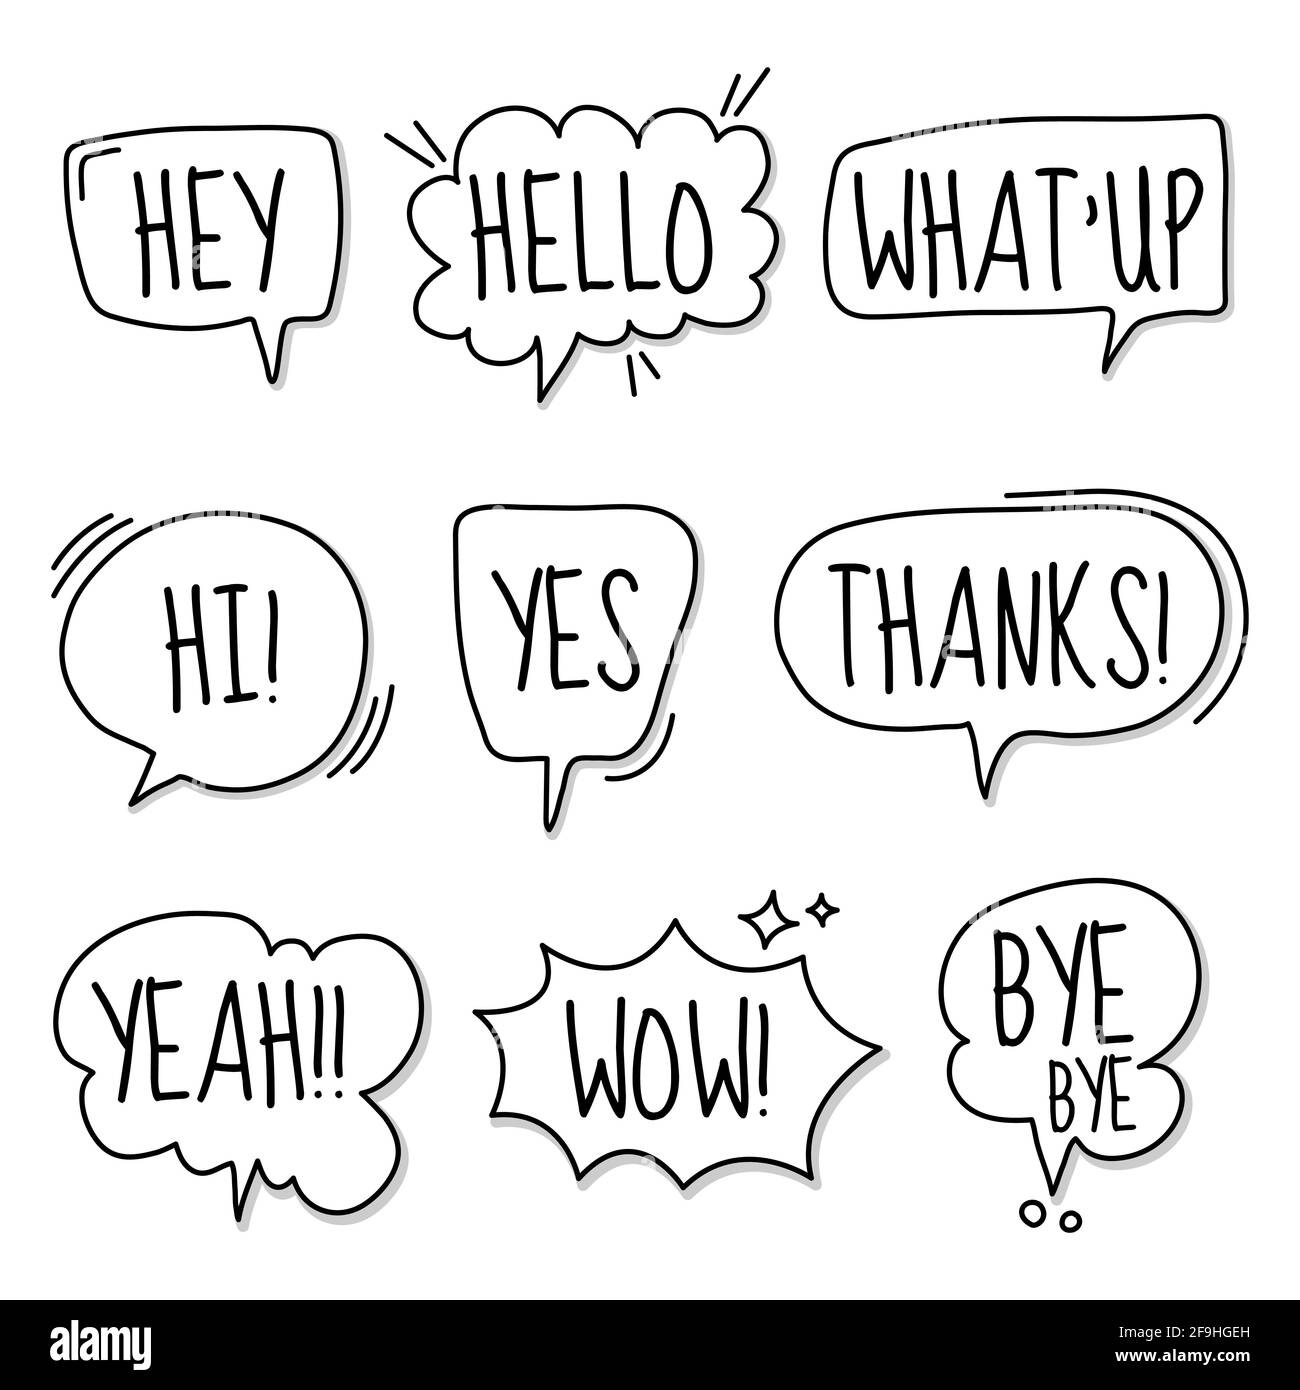 Black and white doodle hand drawn speech bubble vector illustration. Stock Vector